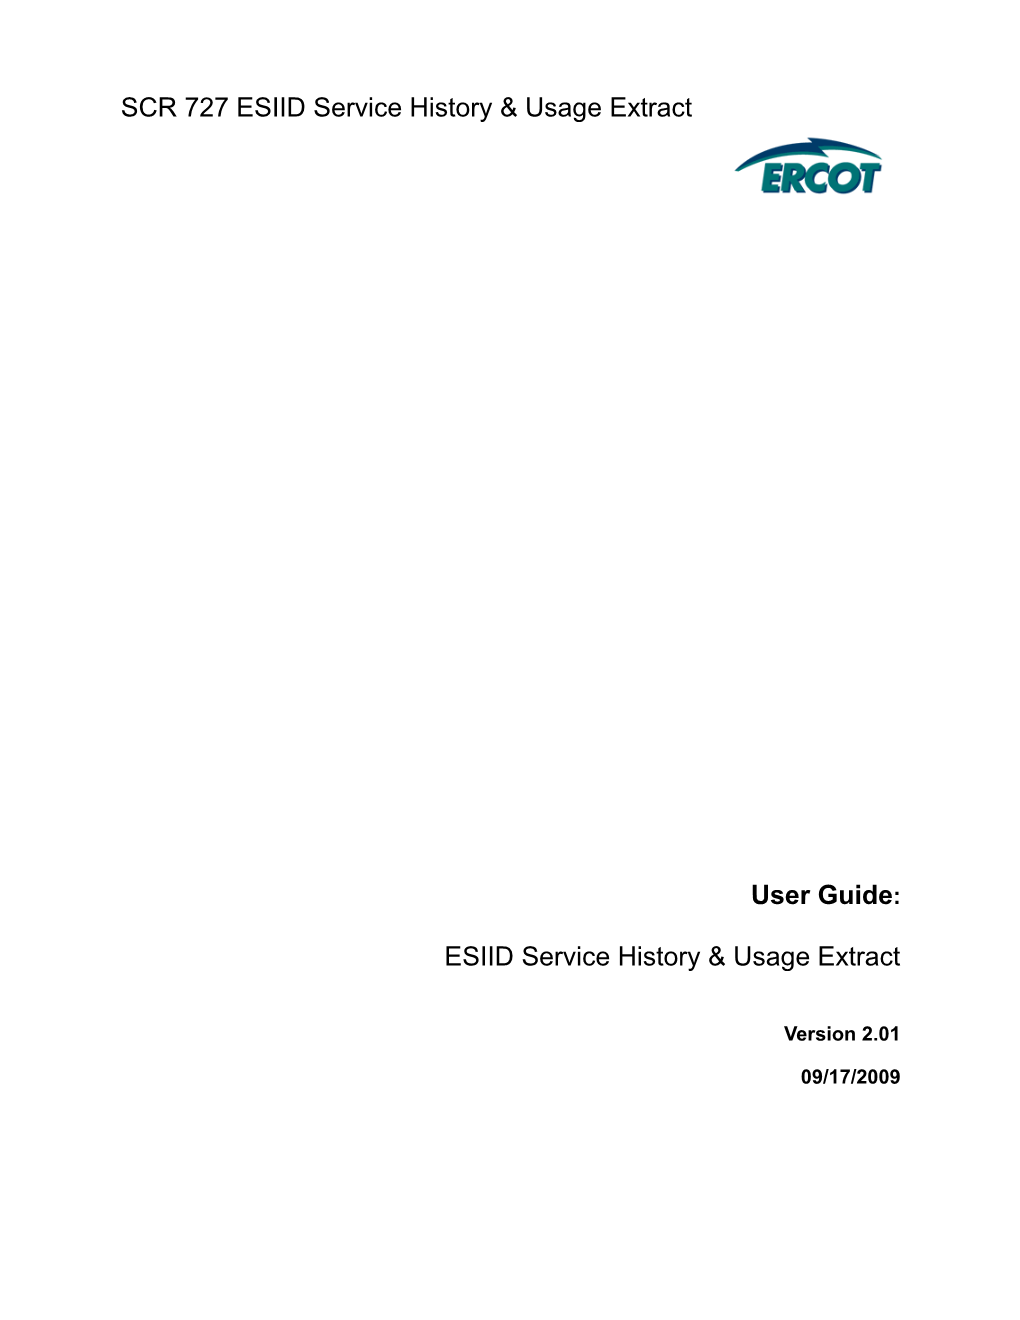 ESIID Service History & Usage Extract